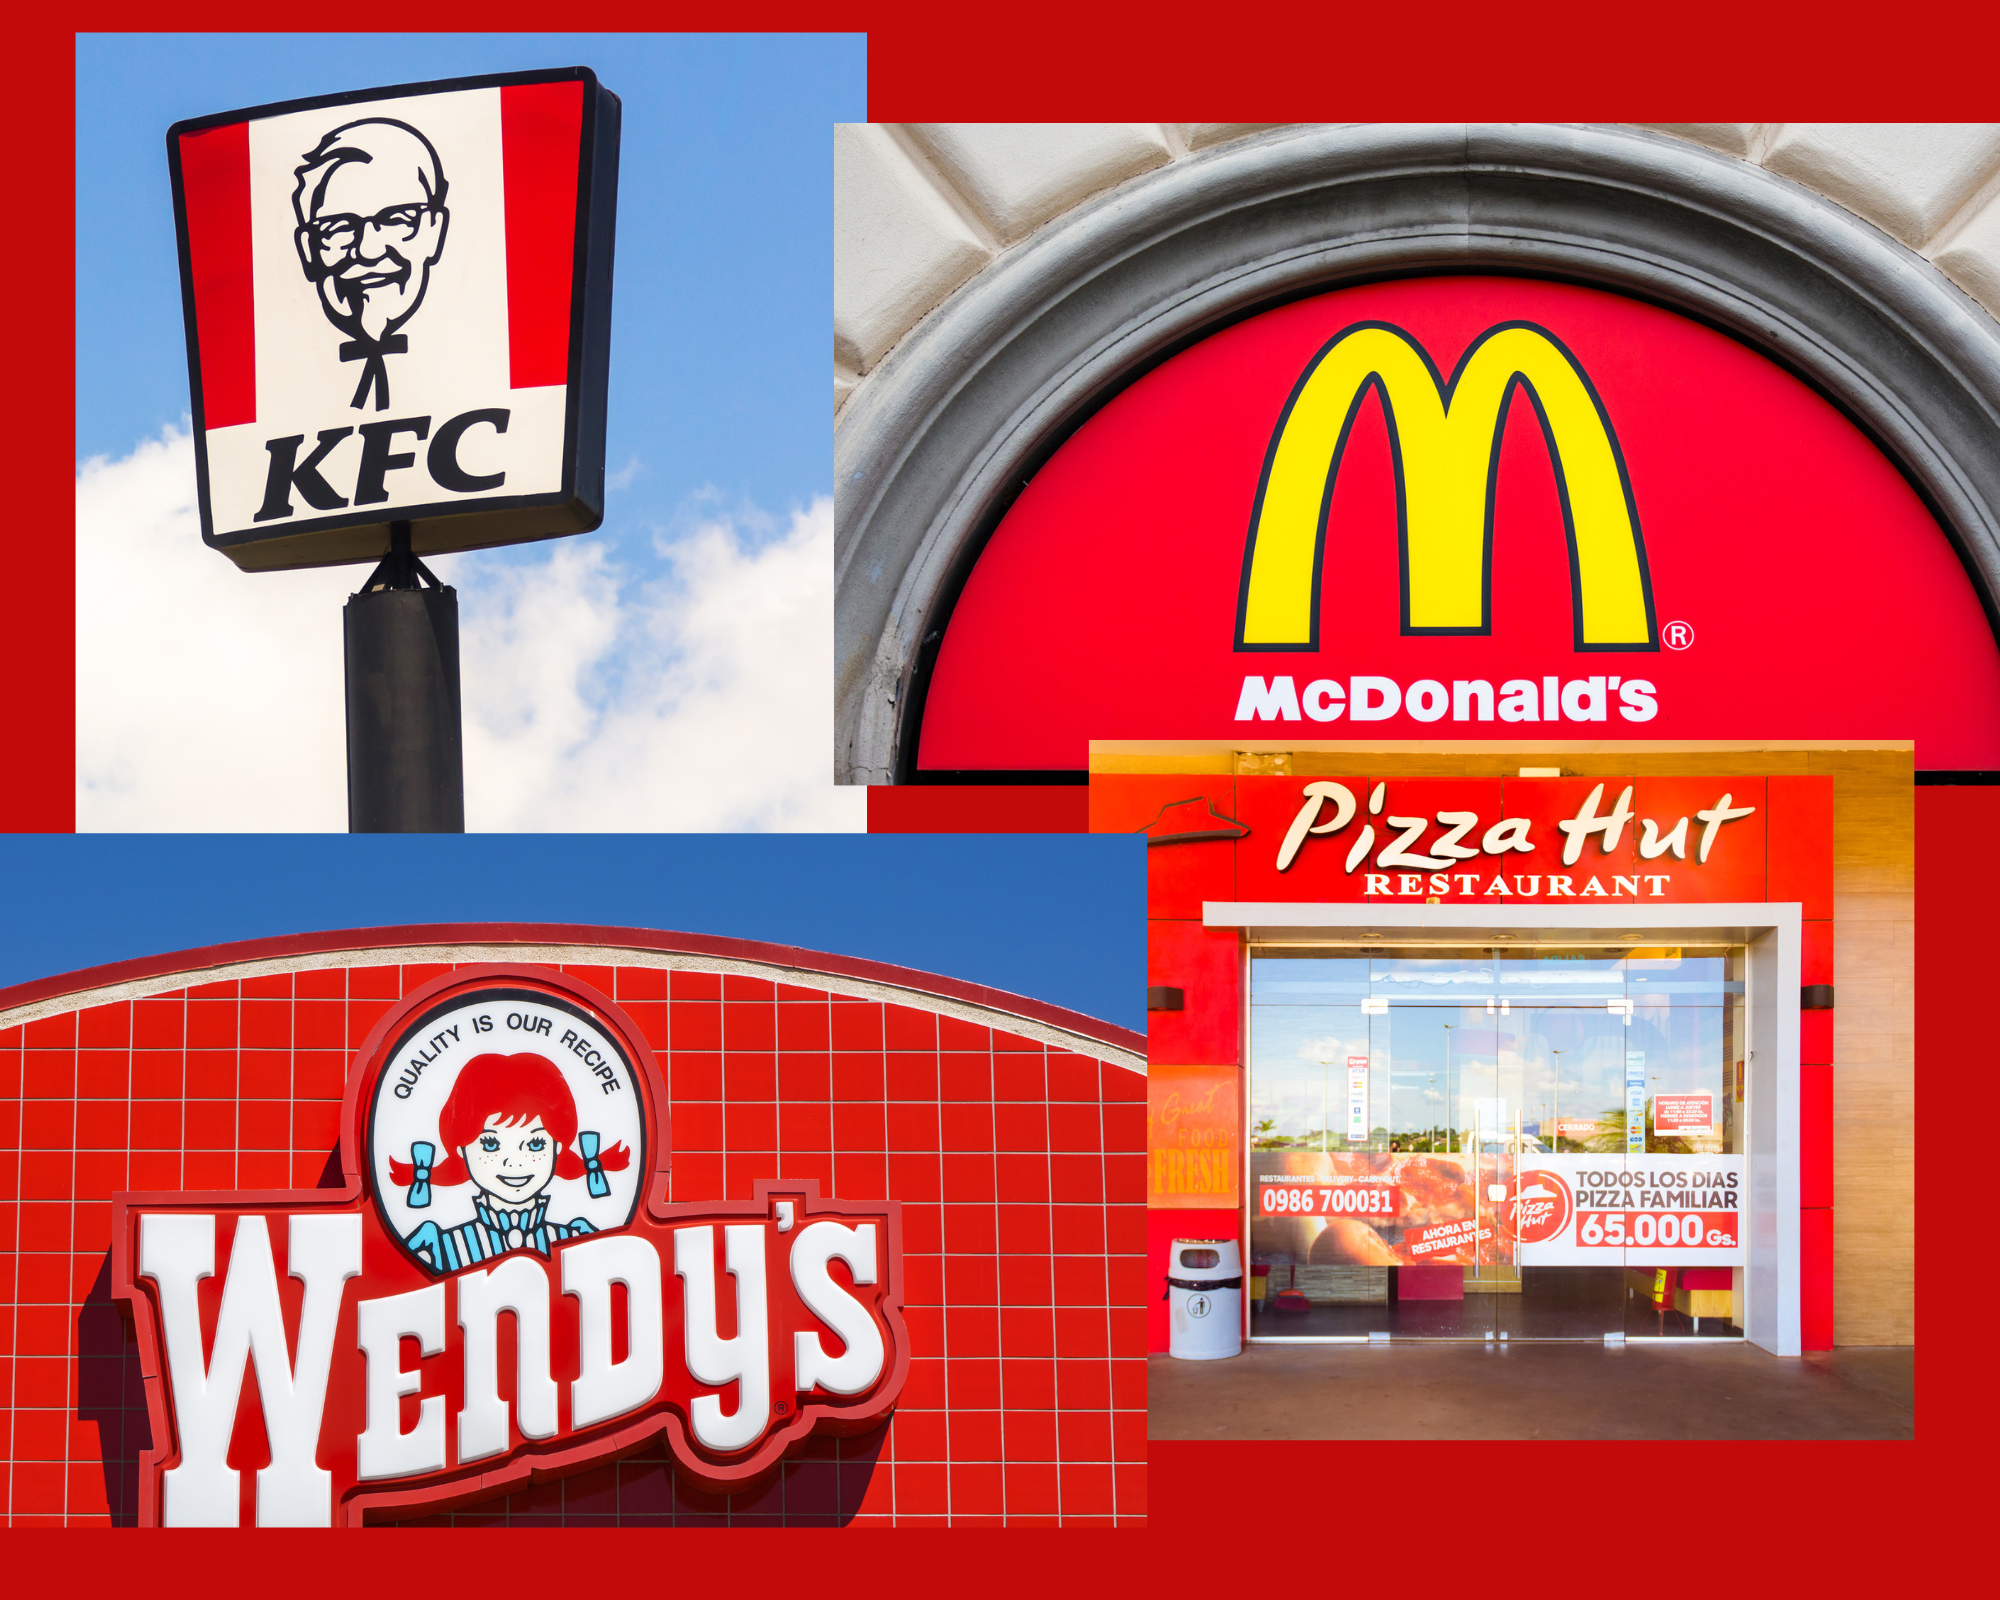 red logos of KFC, McDonald's, Pizza Hut and Wendy's